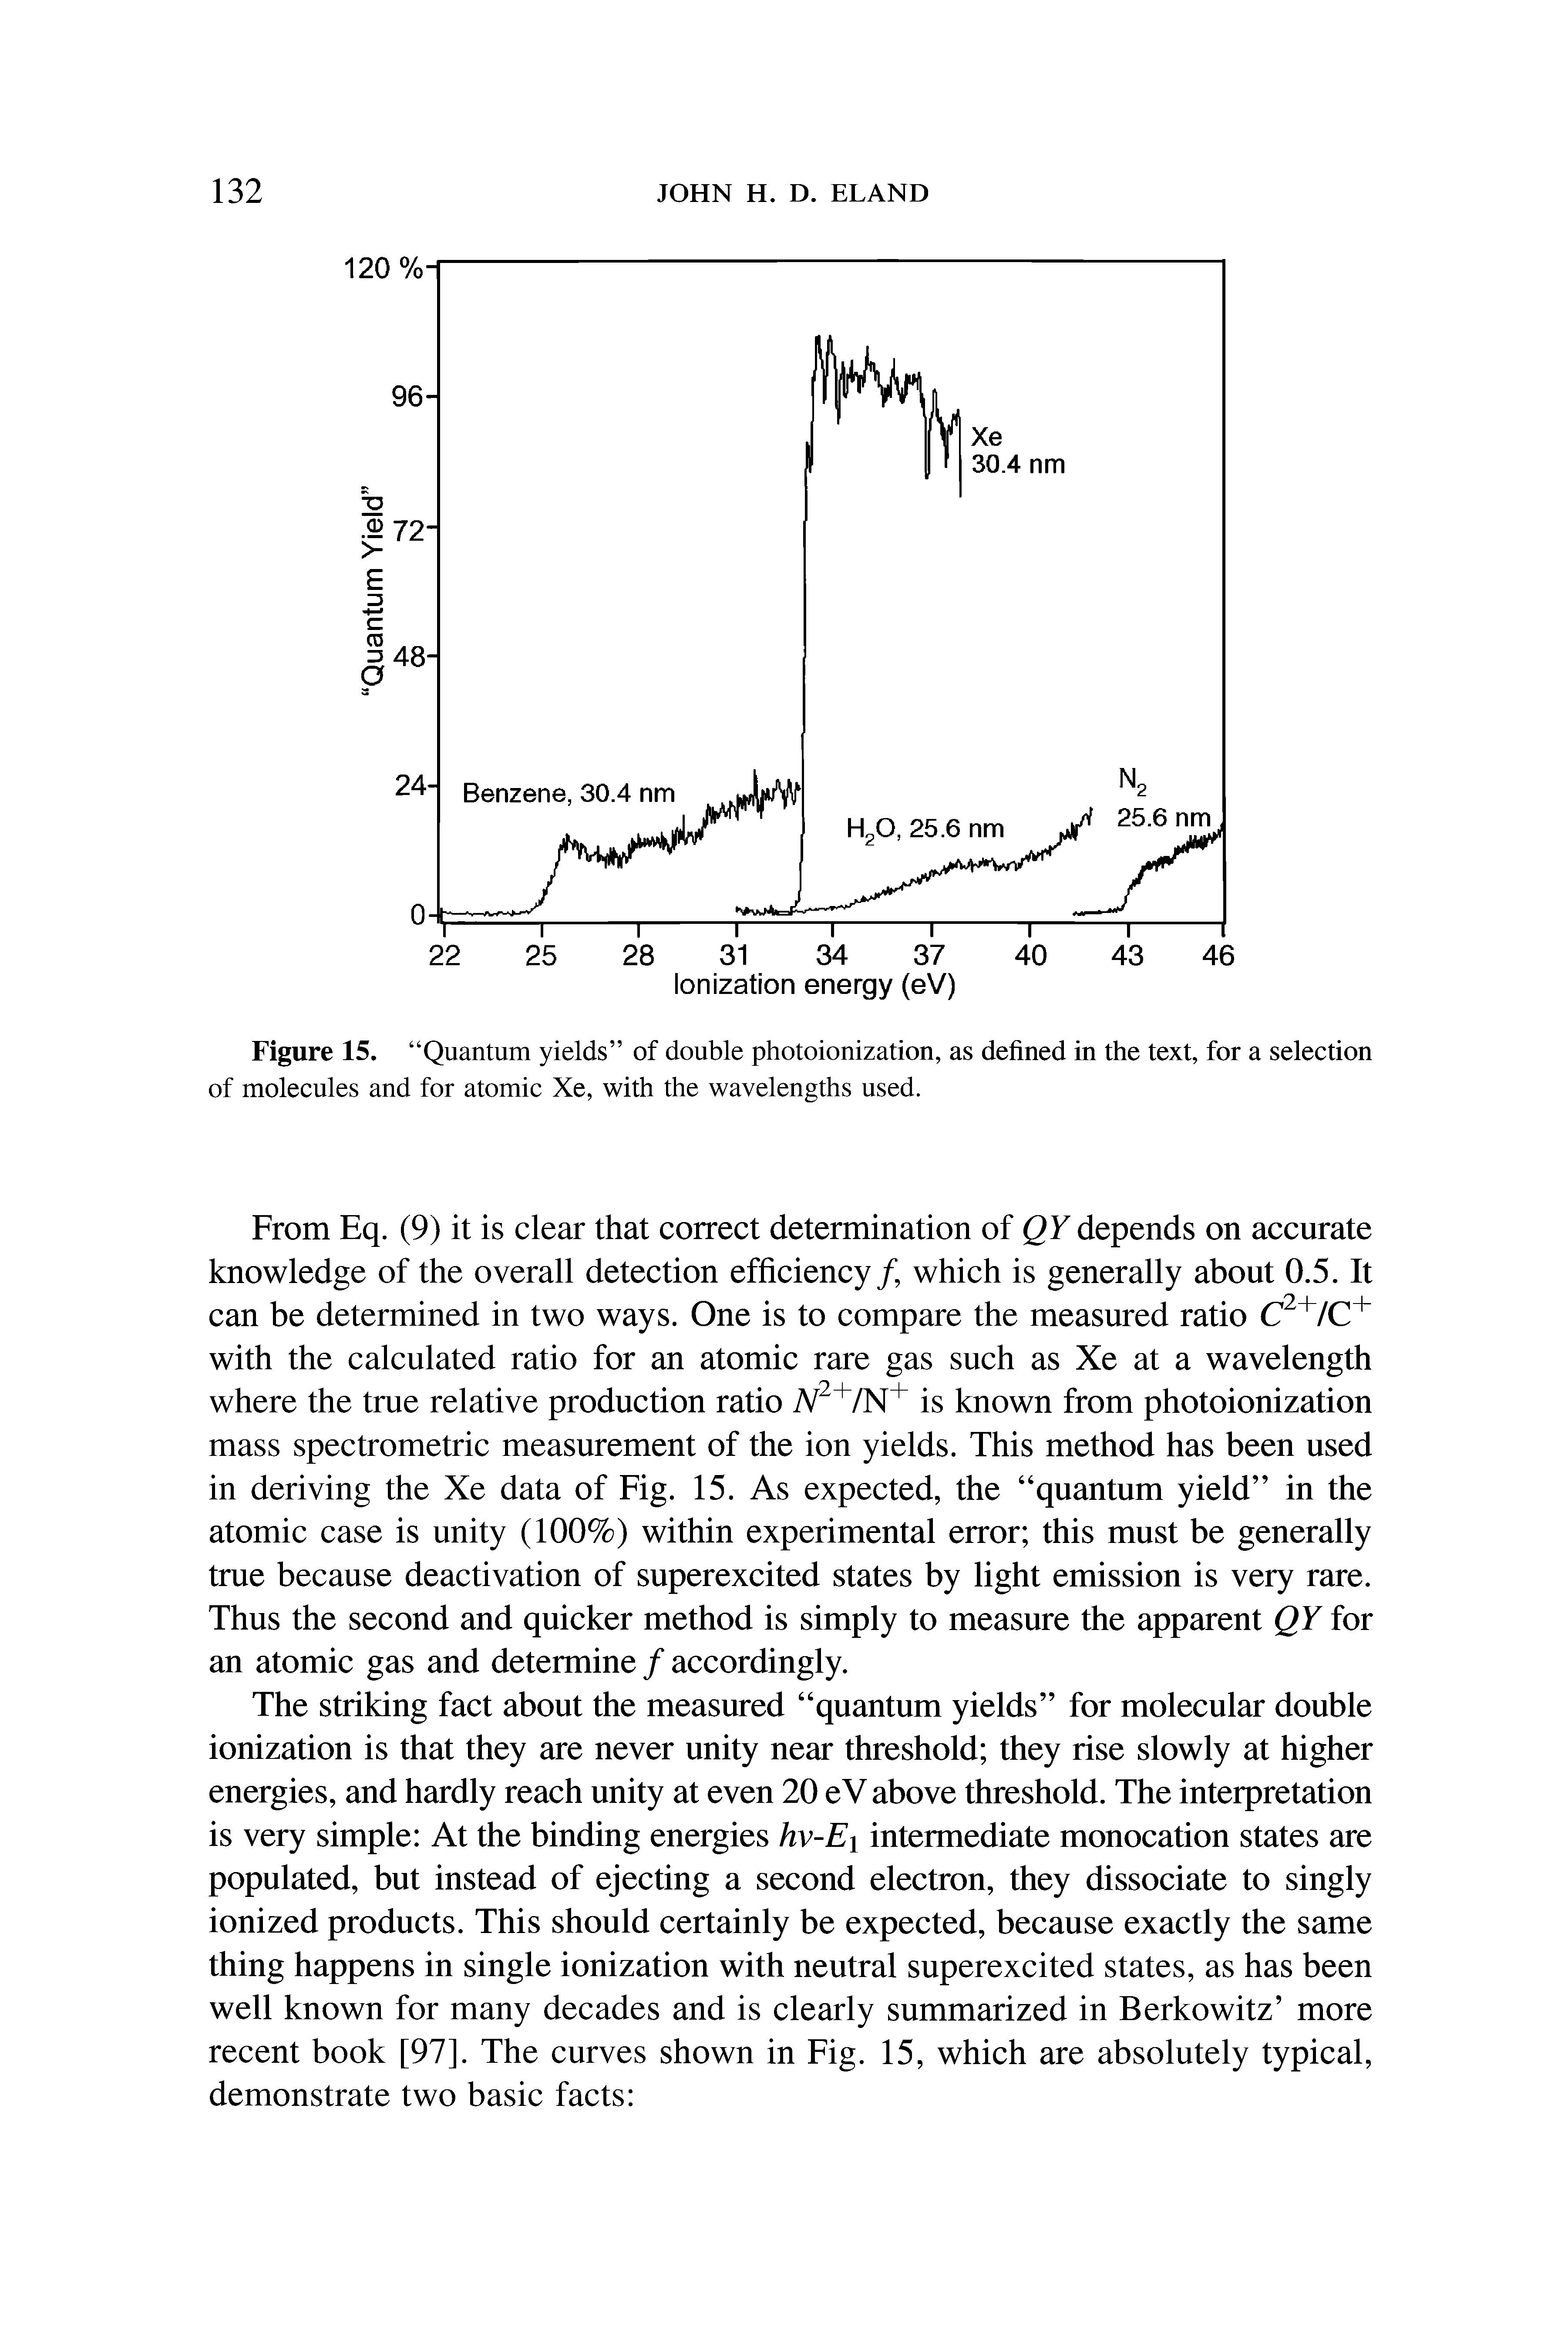 Figure 15. Quantum yields of double photoionization, as defined in the text, for a selection of molecules and for atomic Xe, with the wavelengths used.